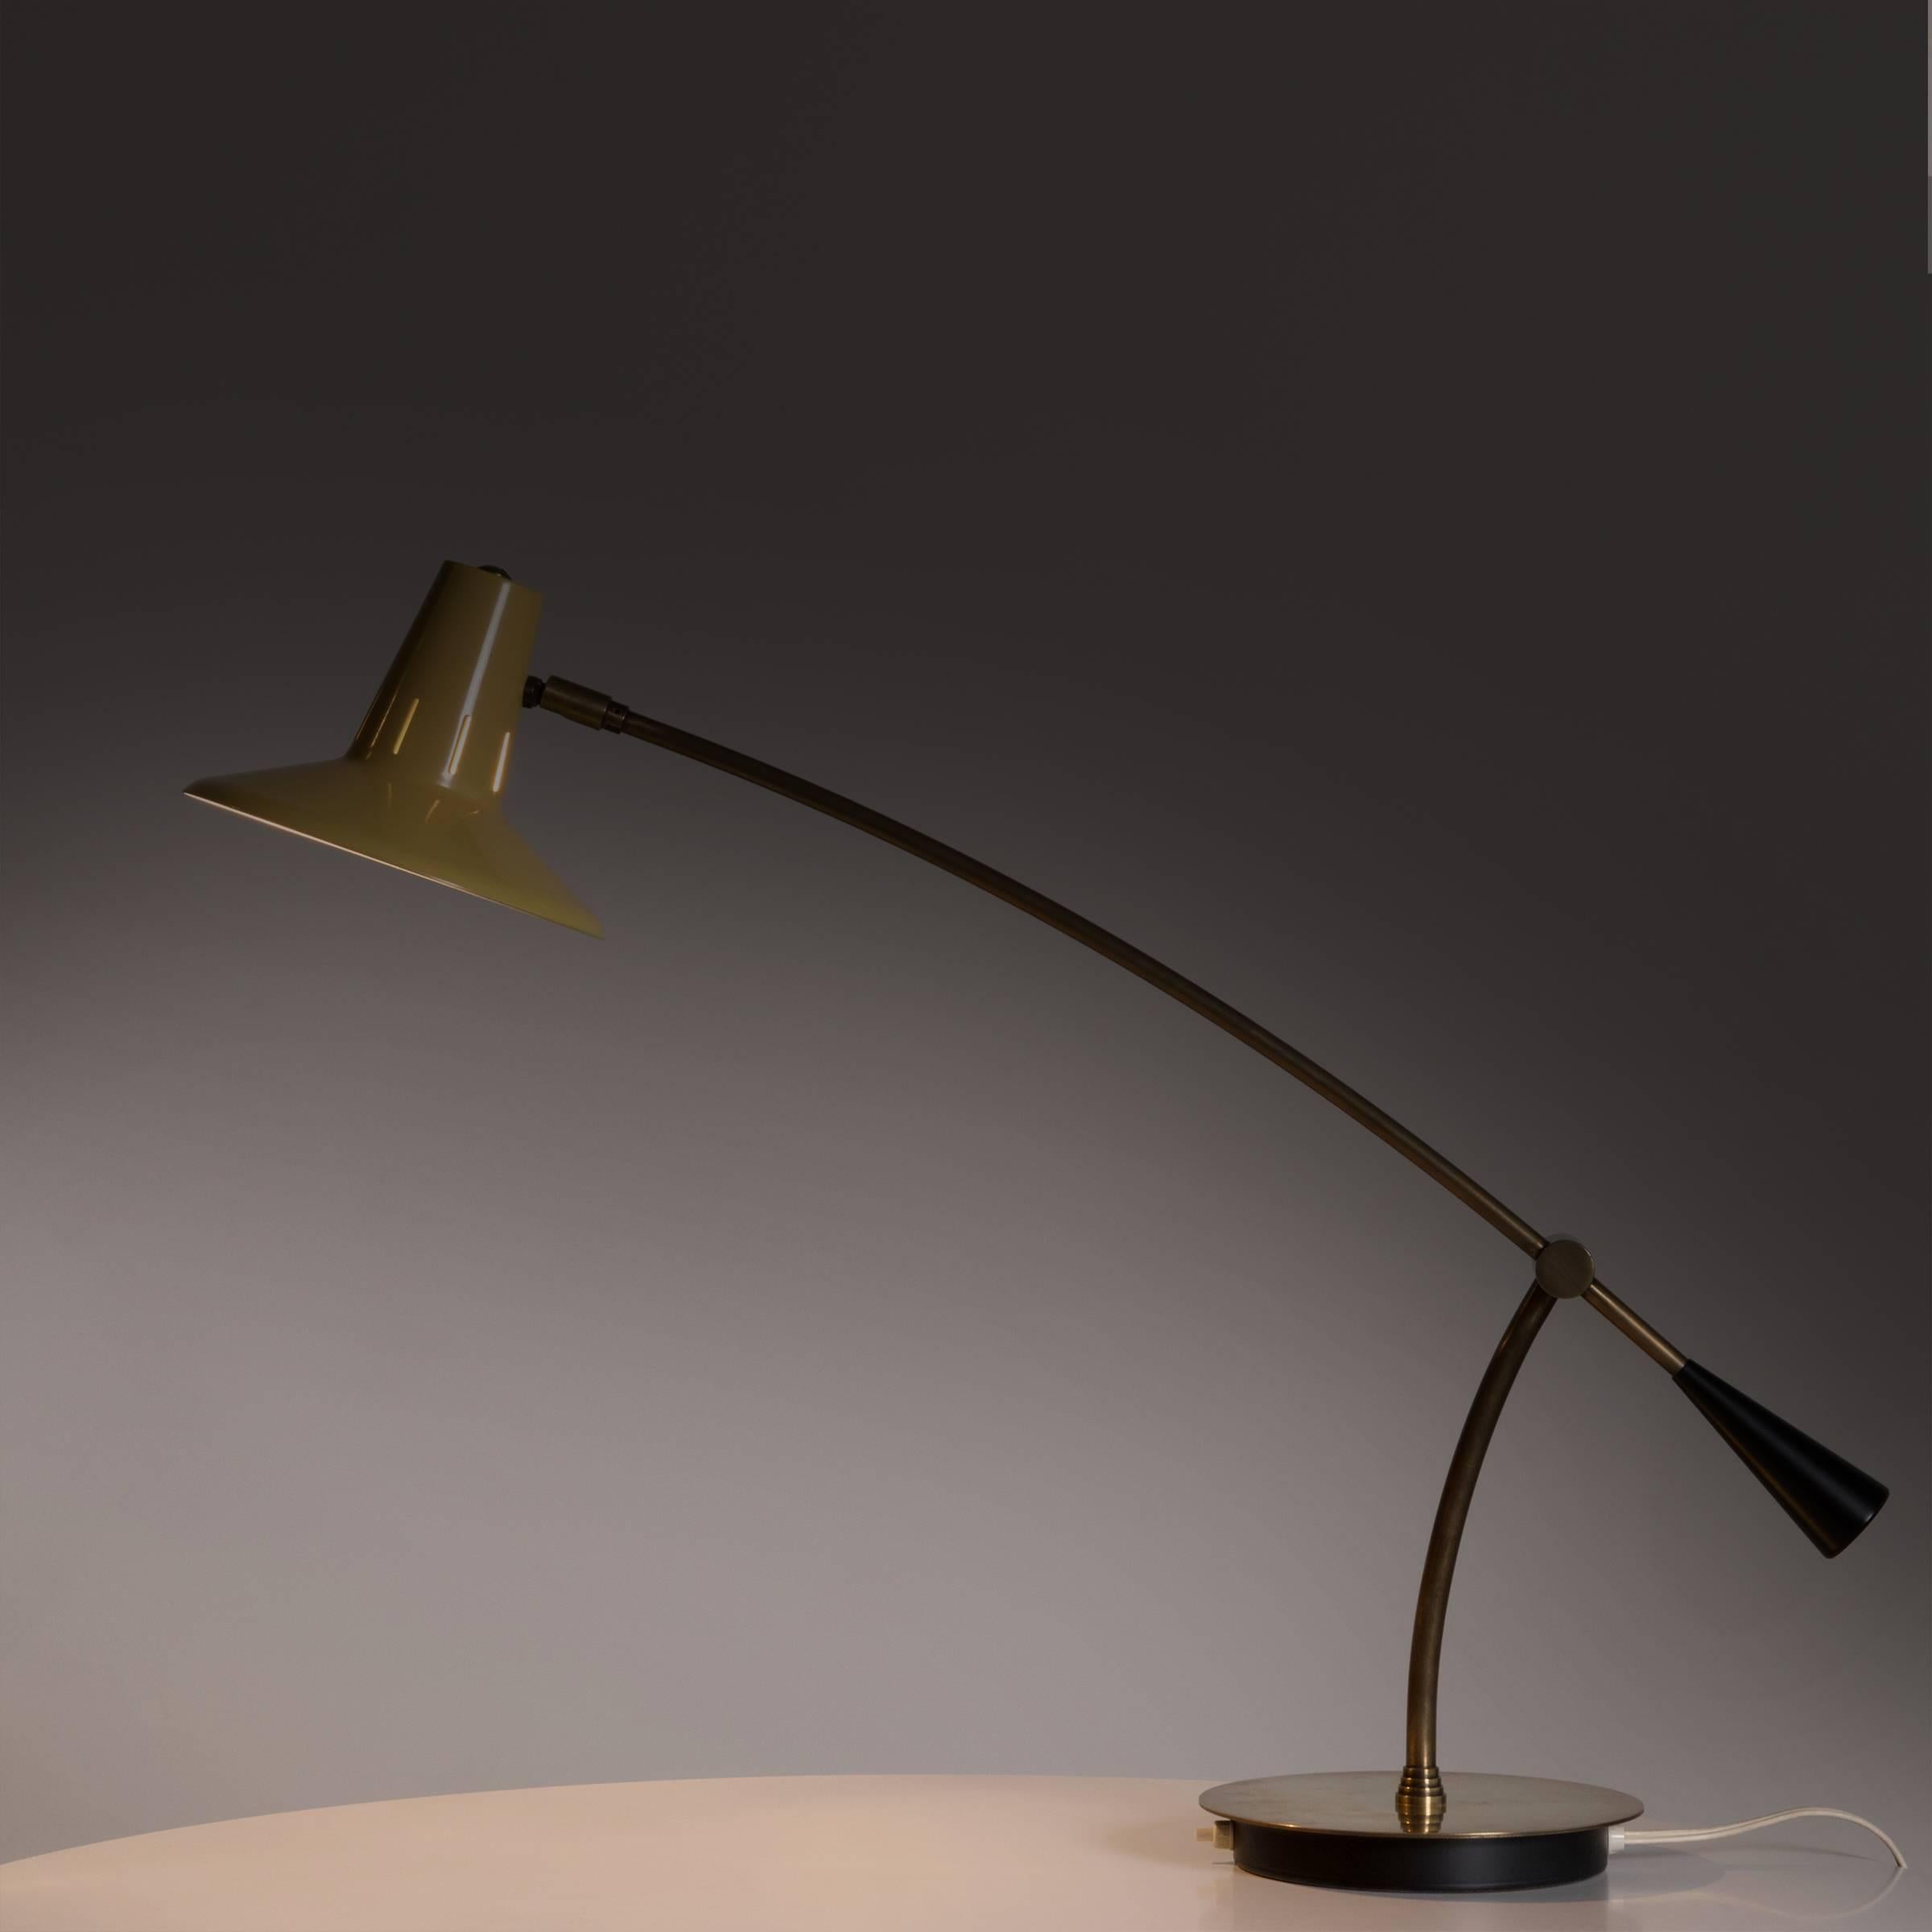 Dutch Desk or Table Lamp in Style of Hala Zeist and Anvia, Netherlands